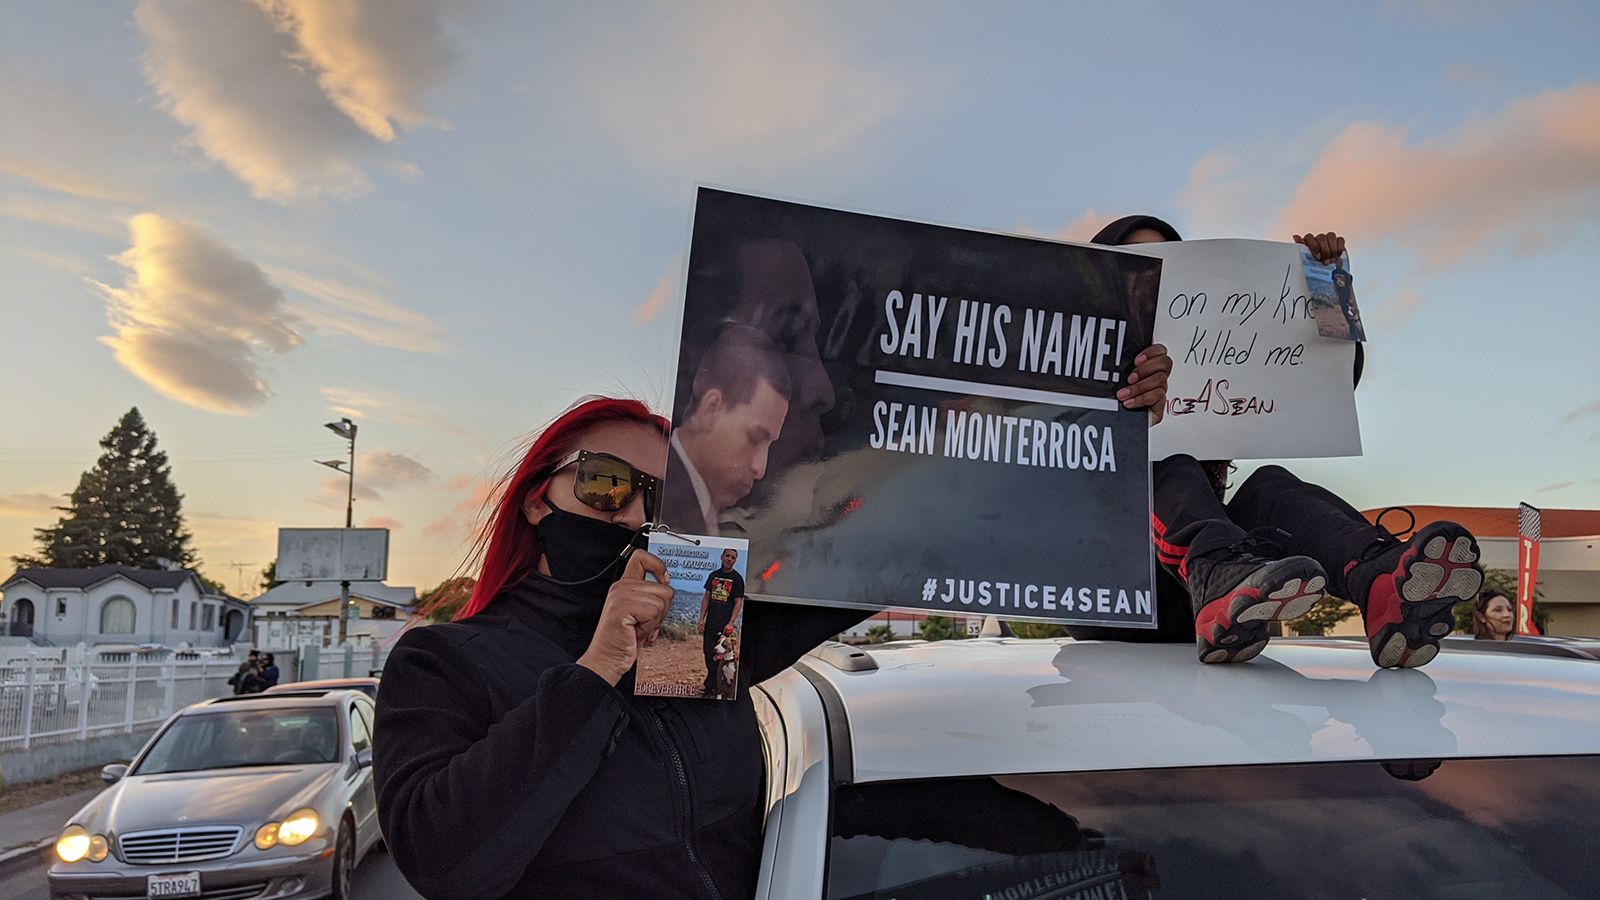 A young woman with red hair wearing sunglasses and a black face mask holds a sign that reads "Say his name! Sean Monterrosa."